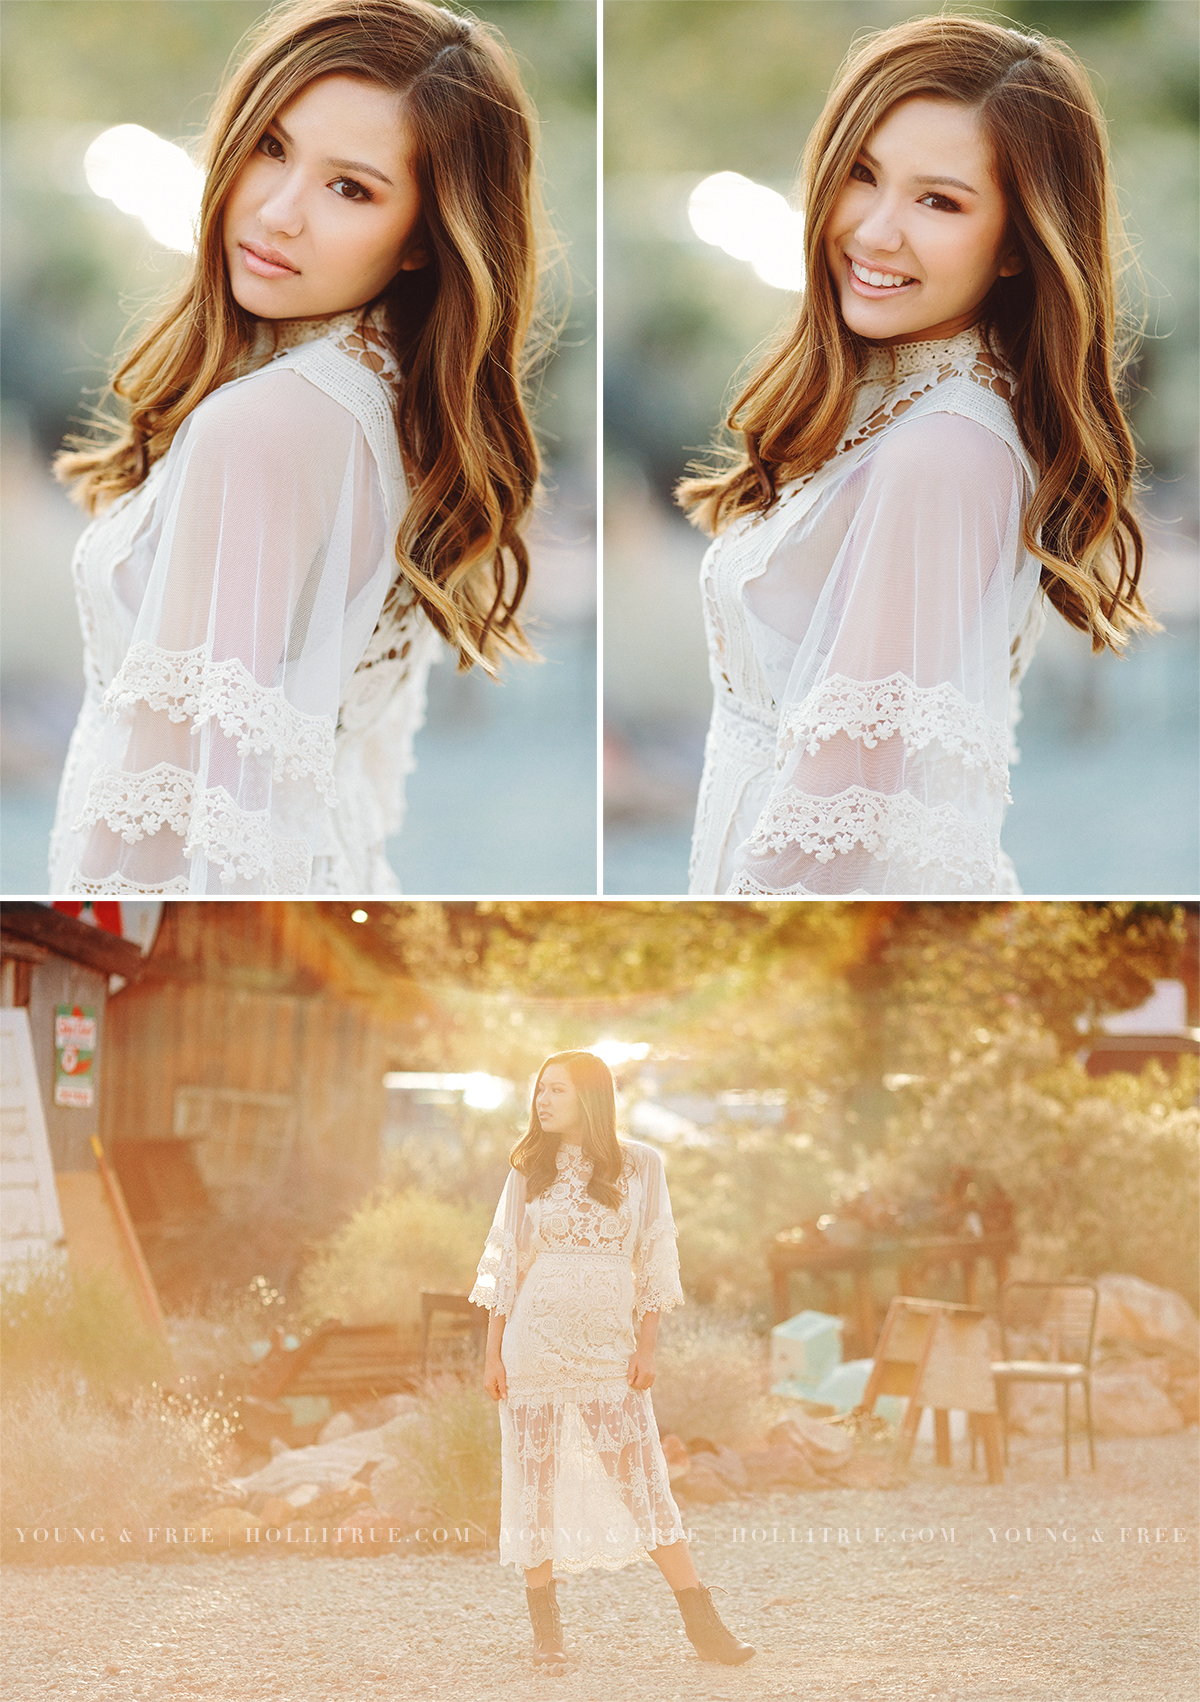 Holli True Photography | Oregon Senior Photographer | Senior Photography in a natural location at sunset